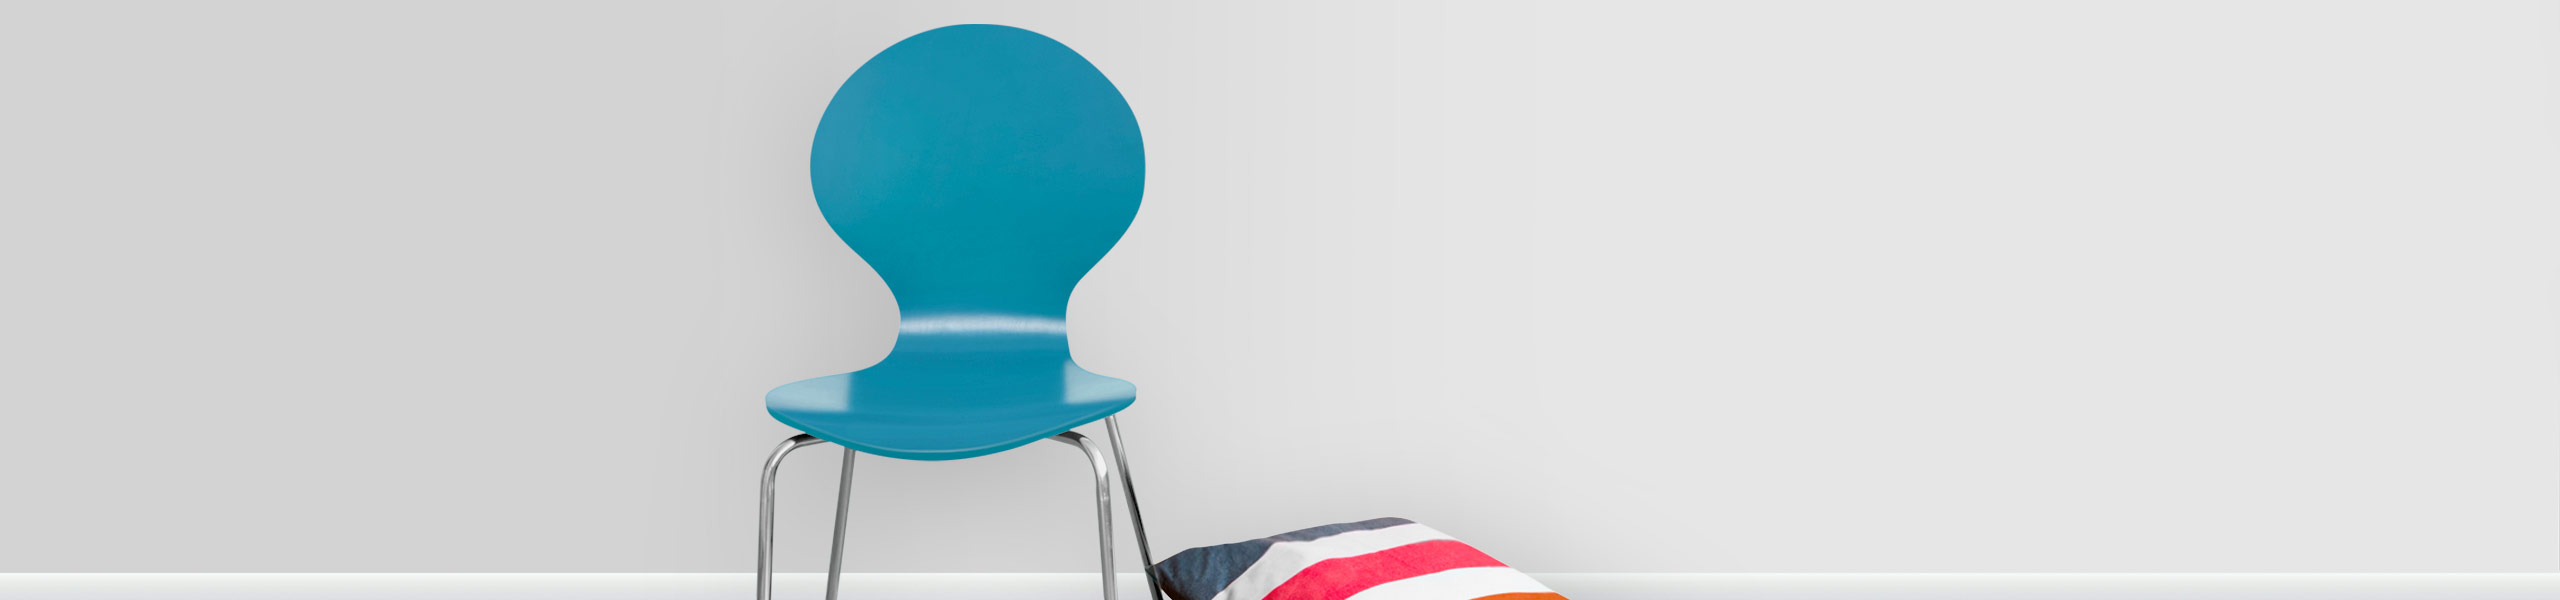 Candy Chair Blue Video Banner